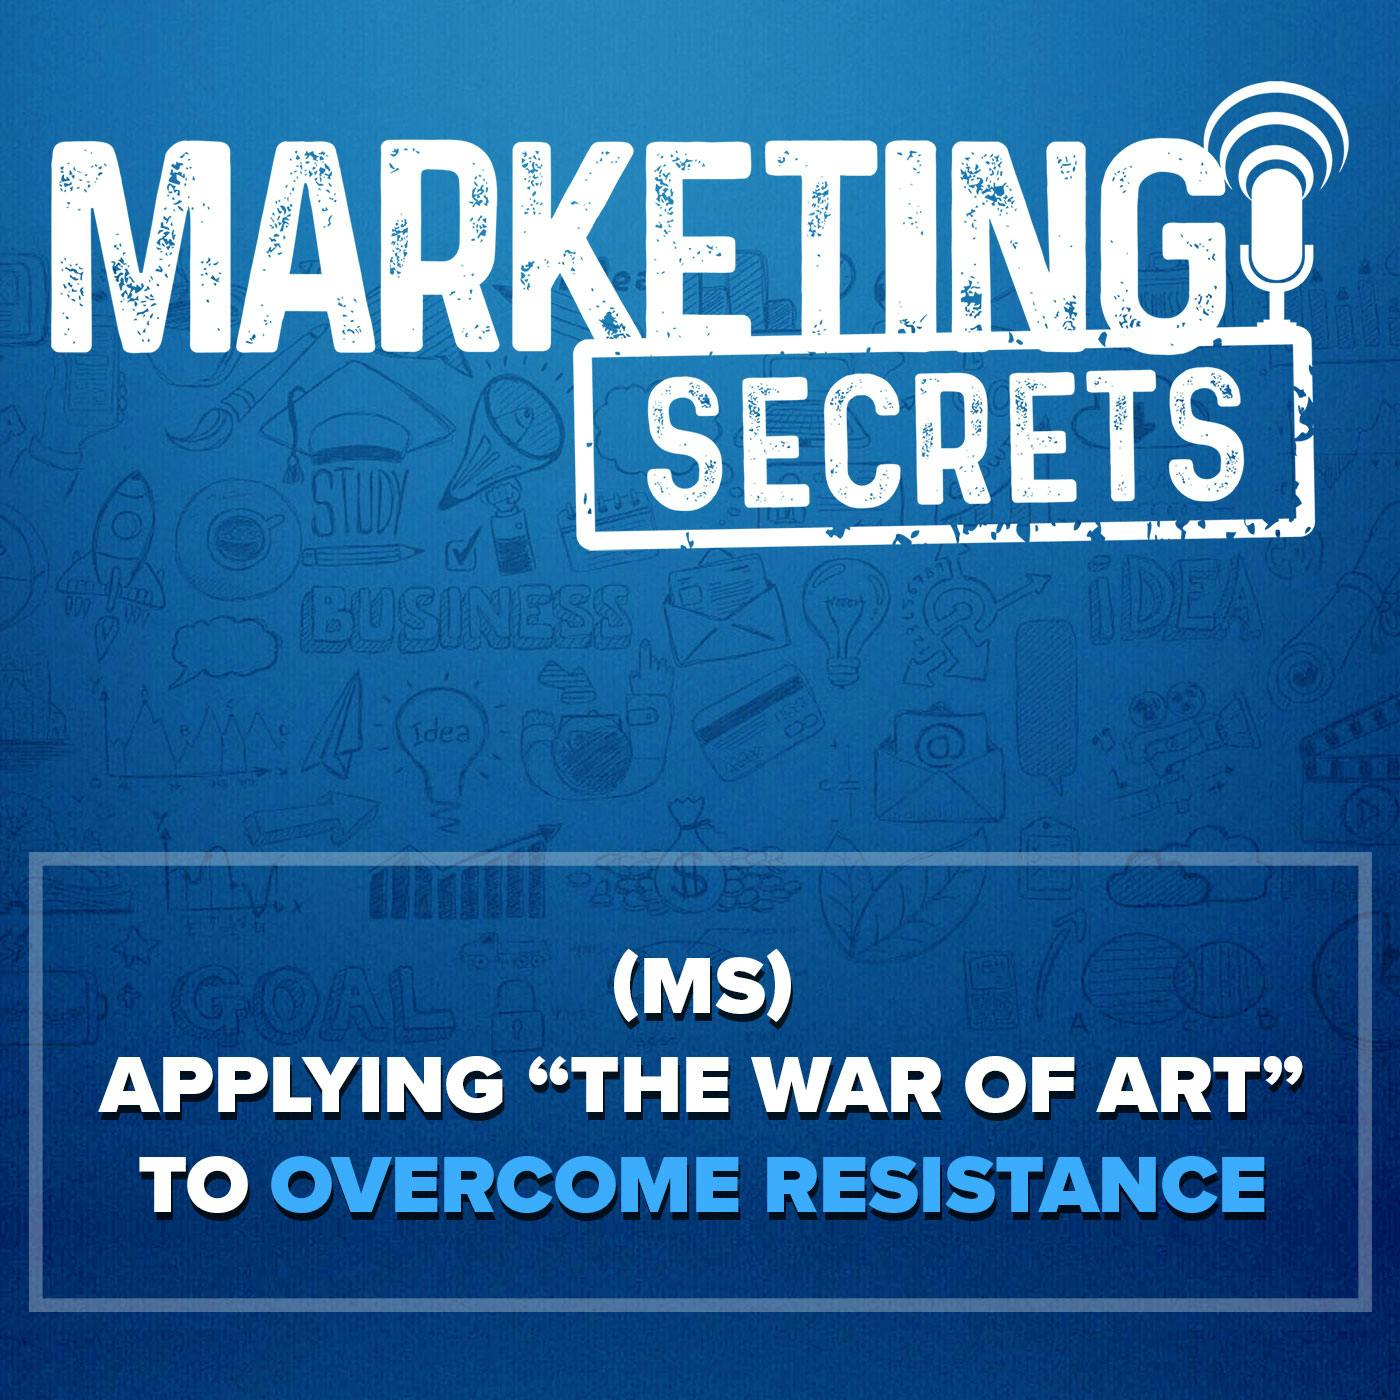 (MS) Applying "The War of Art" to Overcome Resistance